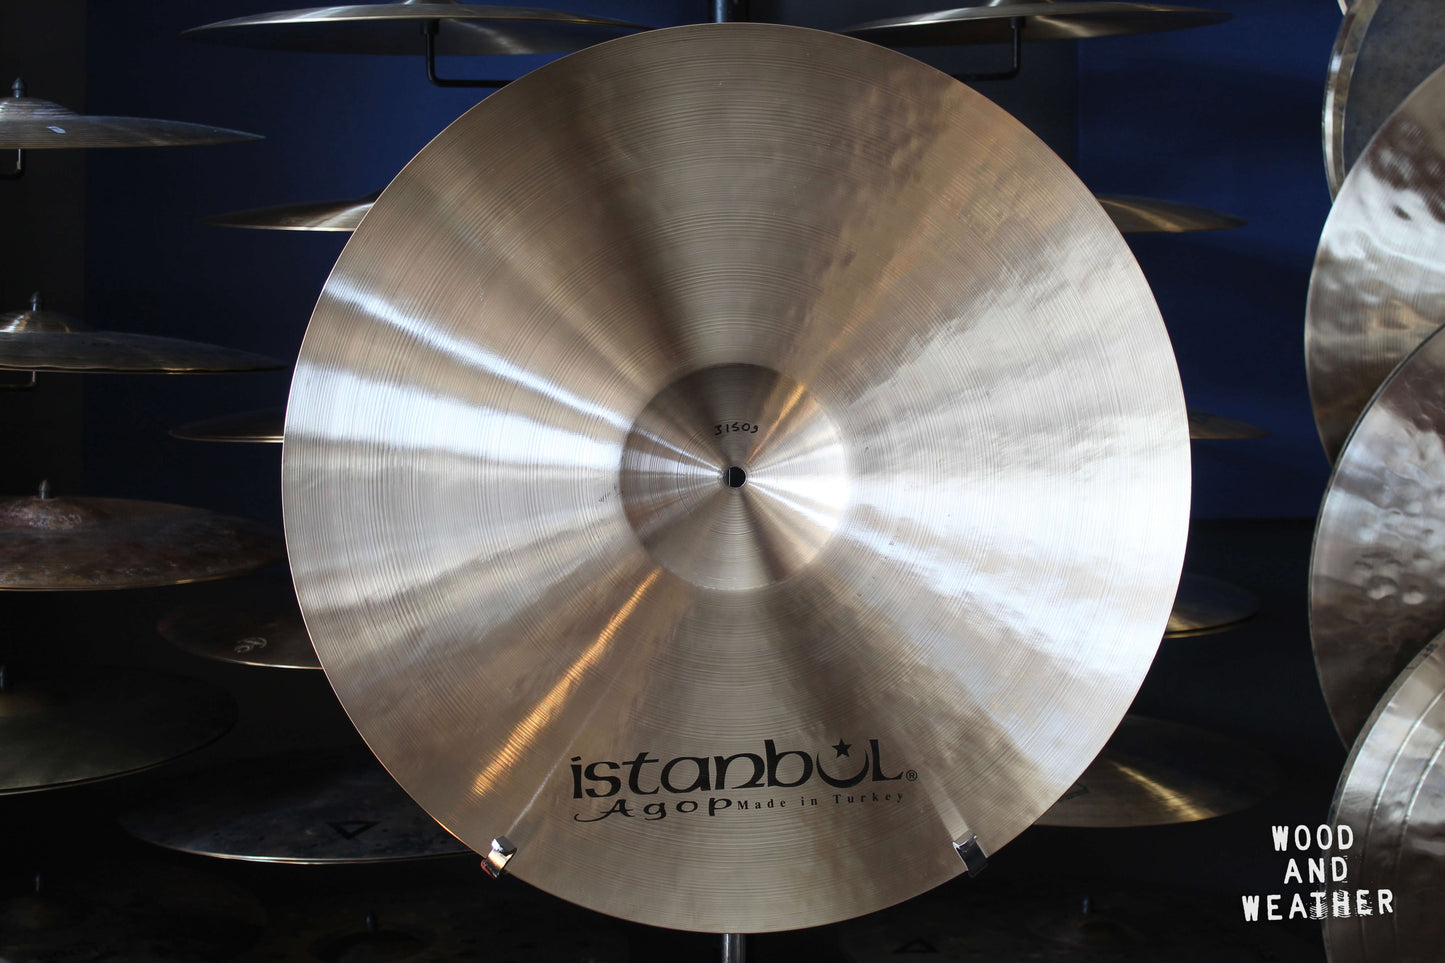 Istanbul Agop 22" Xist Natural Ride Cymbal 3150g